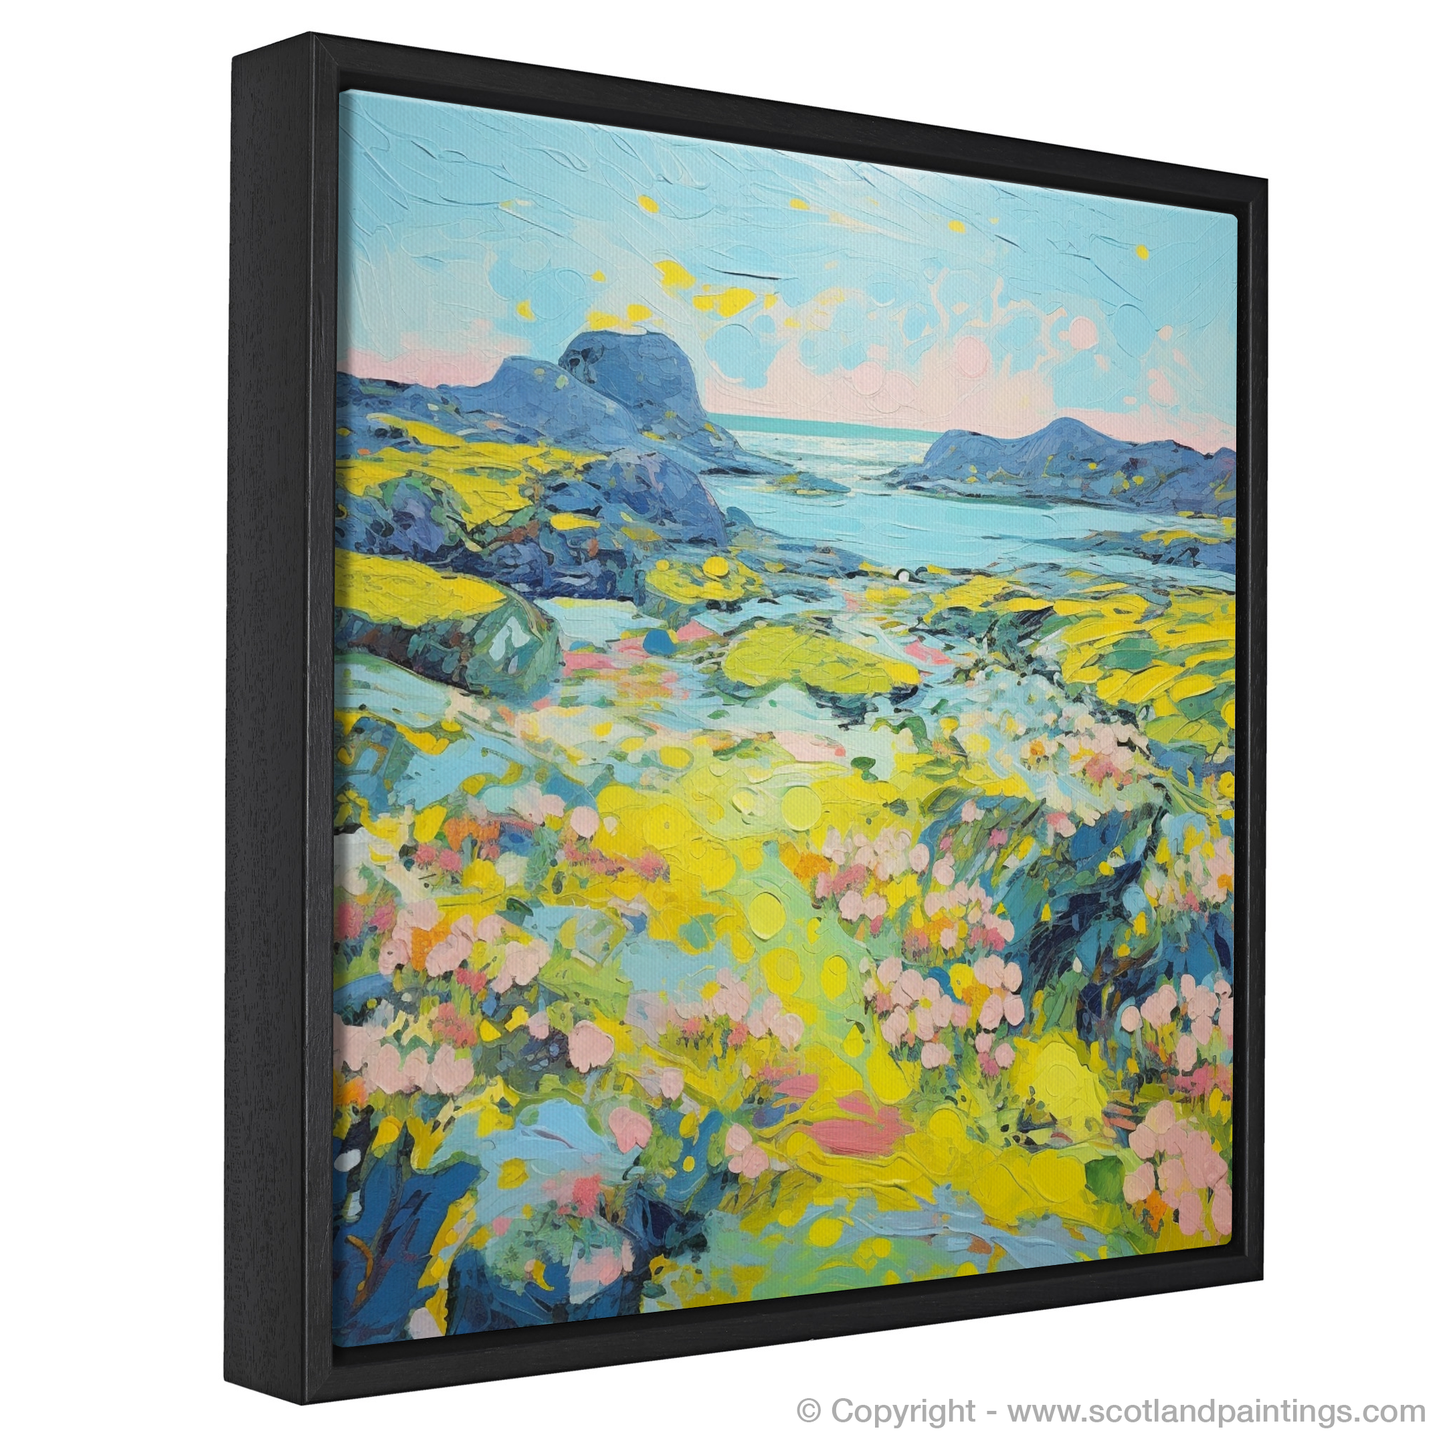 Painting and Art Print of Isle of Lewis, Outer Hebrides in summer entitled "Hebridean Summer Symphony".